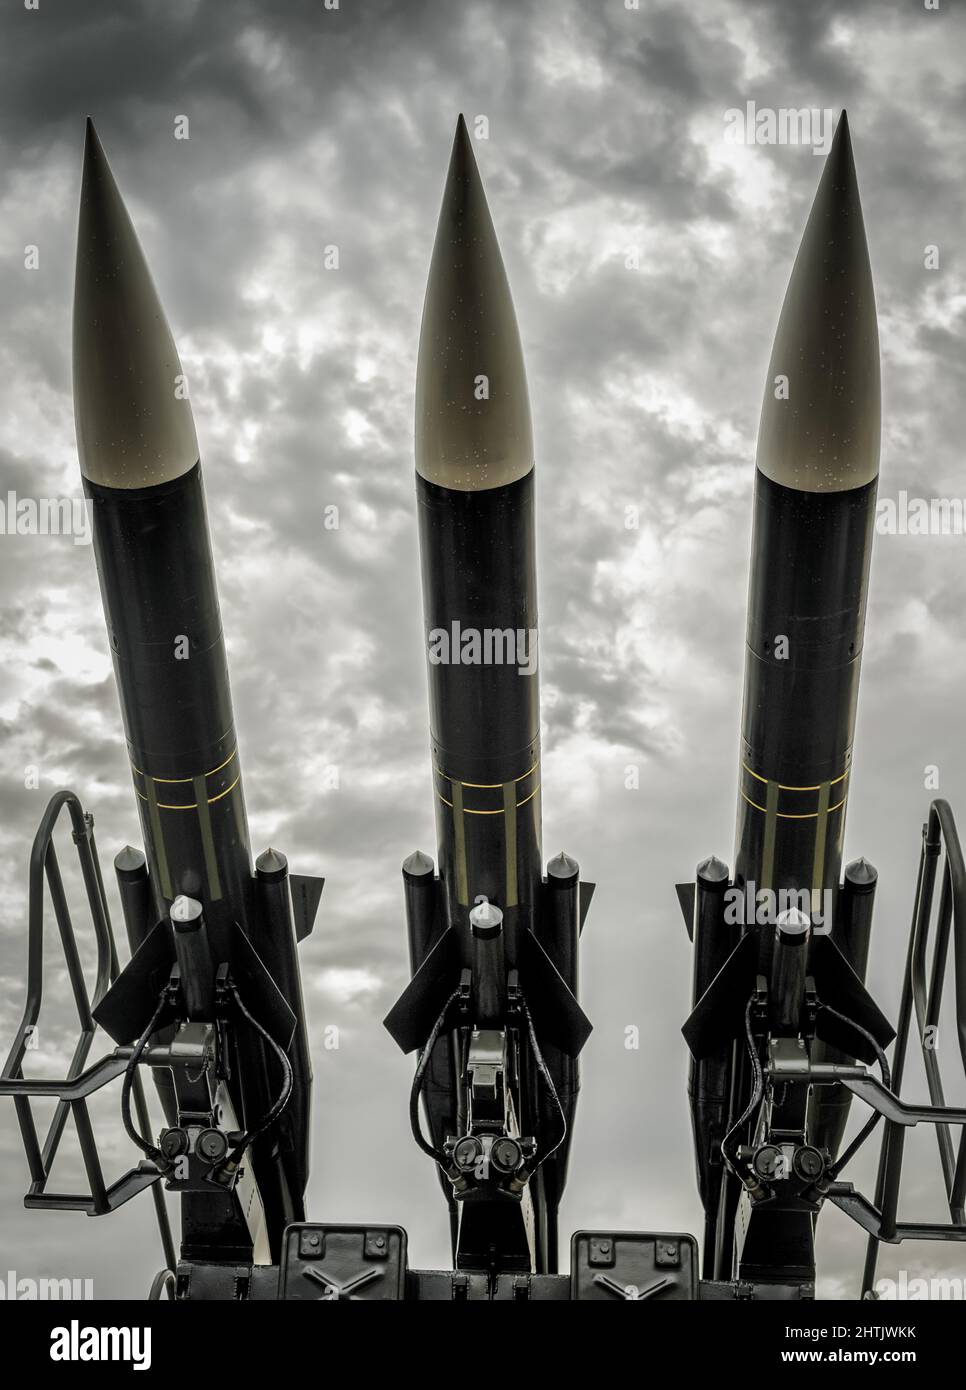 Balistic Rockets. Nuclear Missiles With Warhead Aimed at dramatic Sky. War concept. Stock Photo